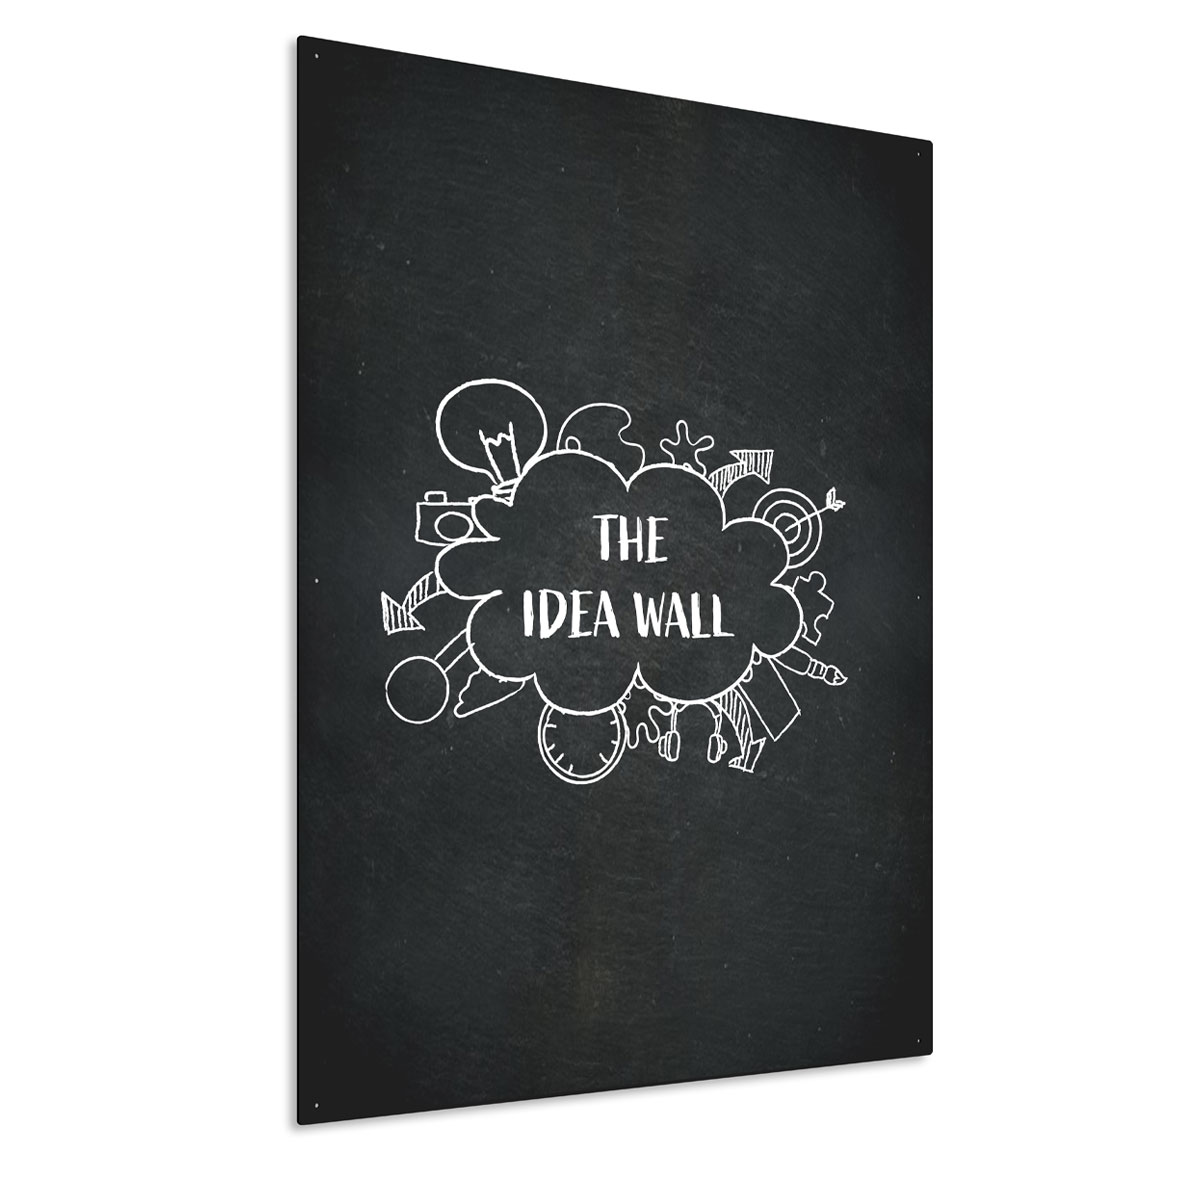 Outdoor Chalkboards For Business And Educational Settings - HPL Black Board Writing Surface For Brainstorming